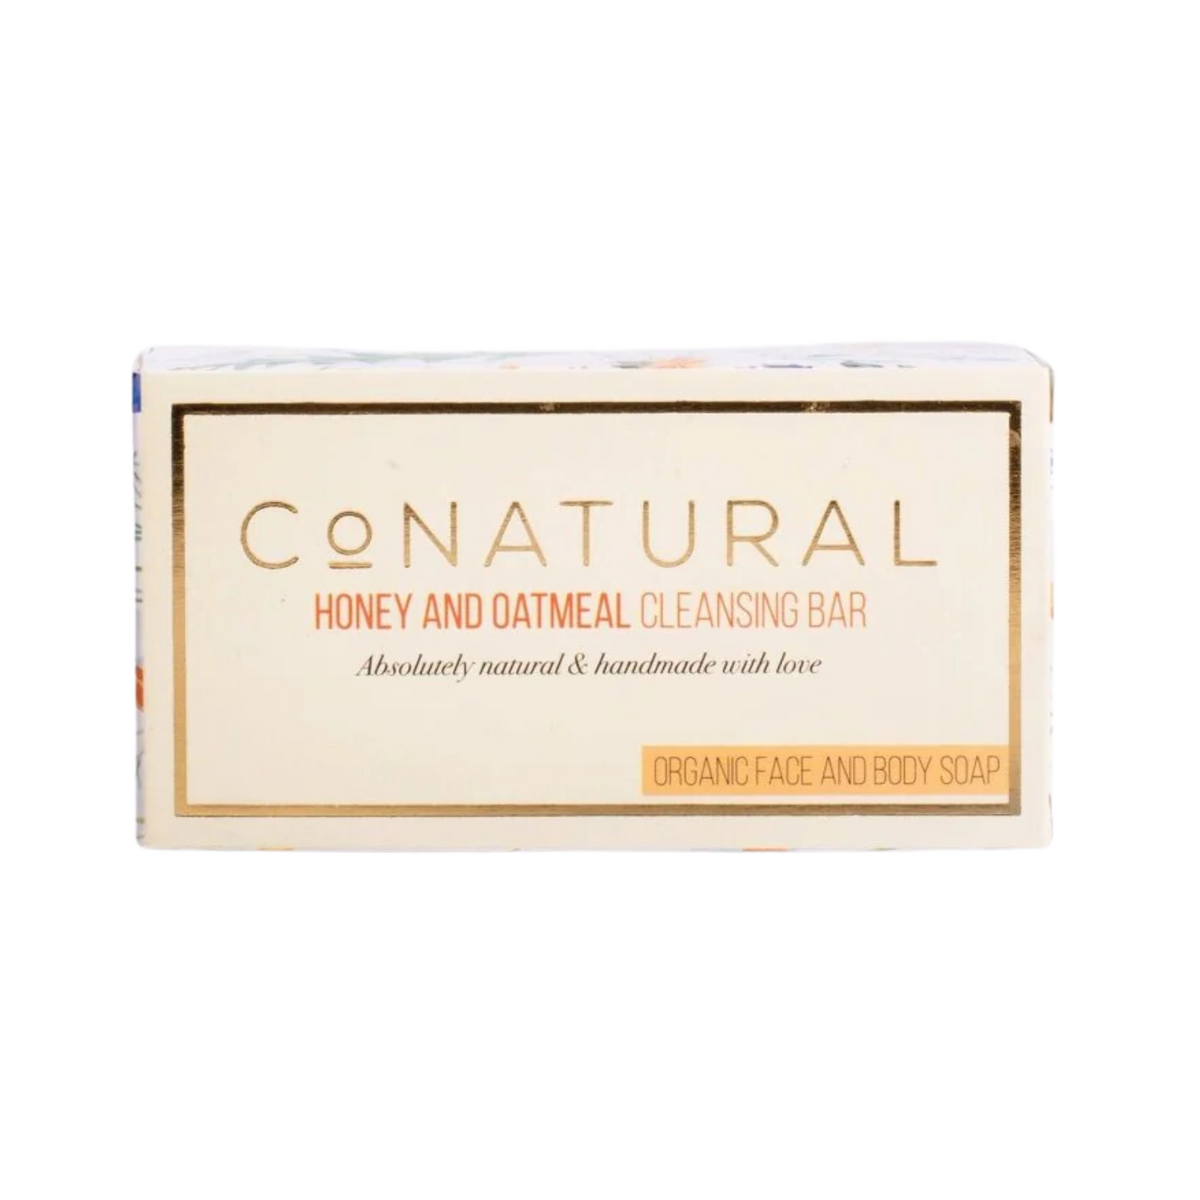 co-natural-honey-and-oatmeal-cleansing-bar-107g